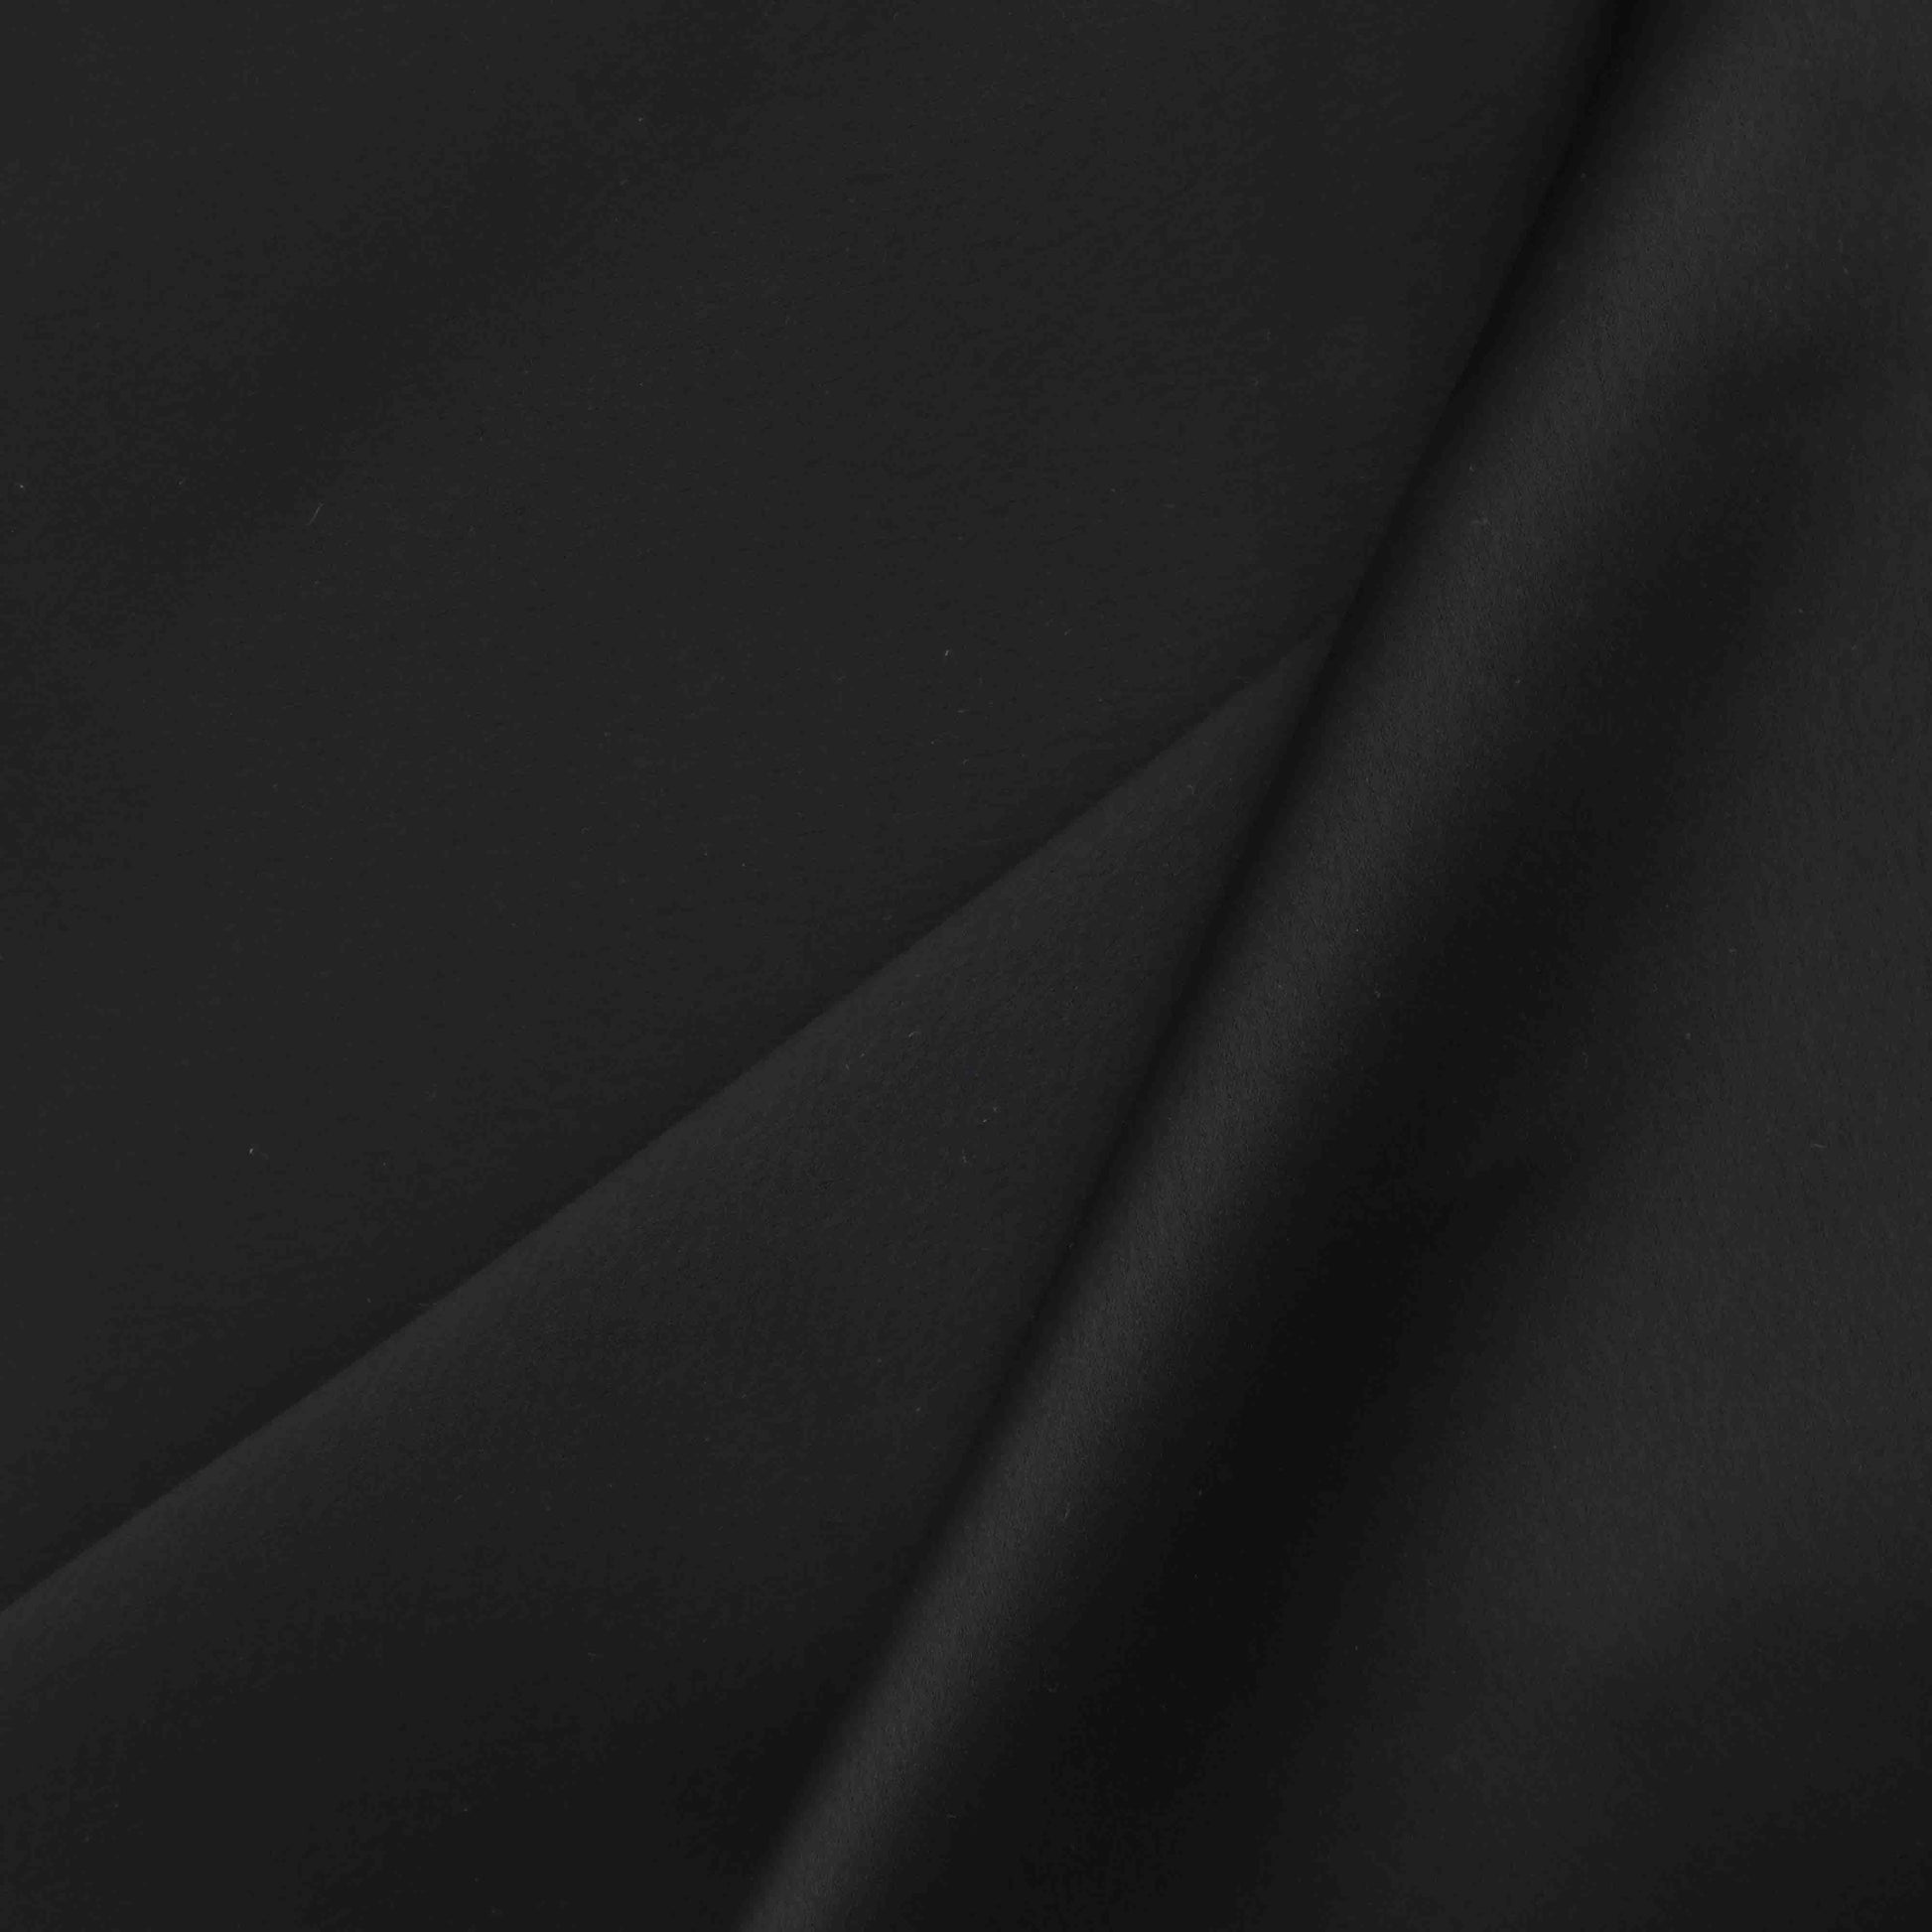 A European-made heavyweight Satin in Phantom. A beautiful fabric that has a unique silky feeling with an elegant finish. This is a double-sided fabric, with White underneath its Black exterior.